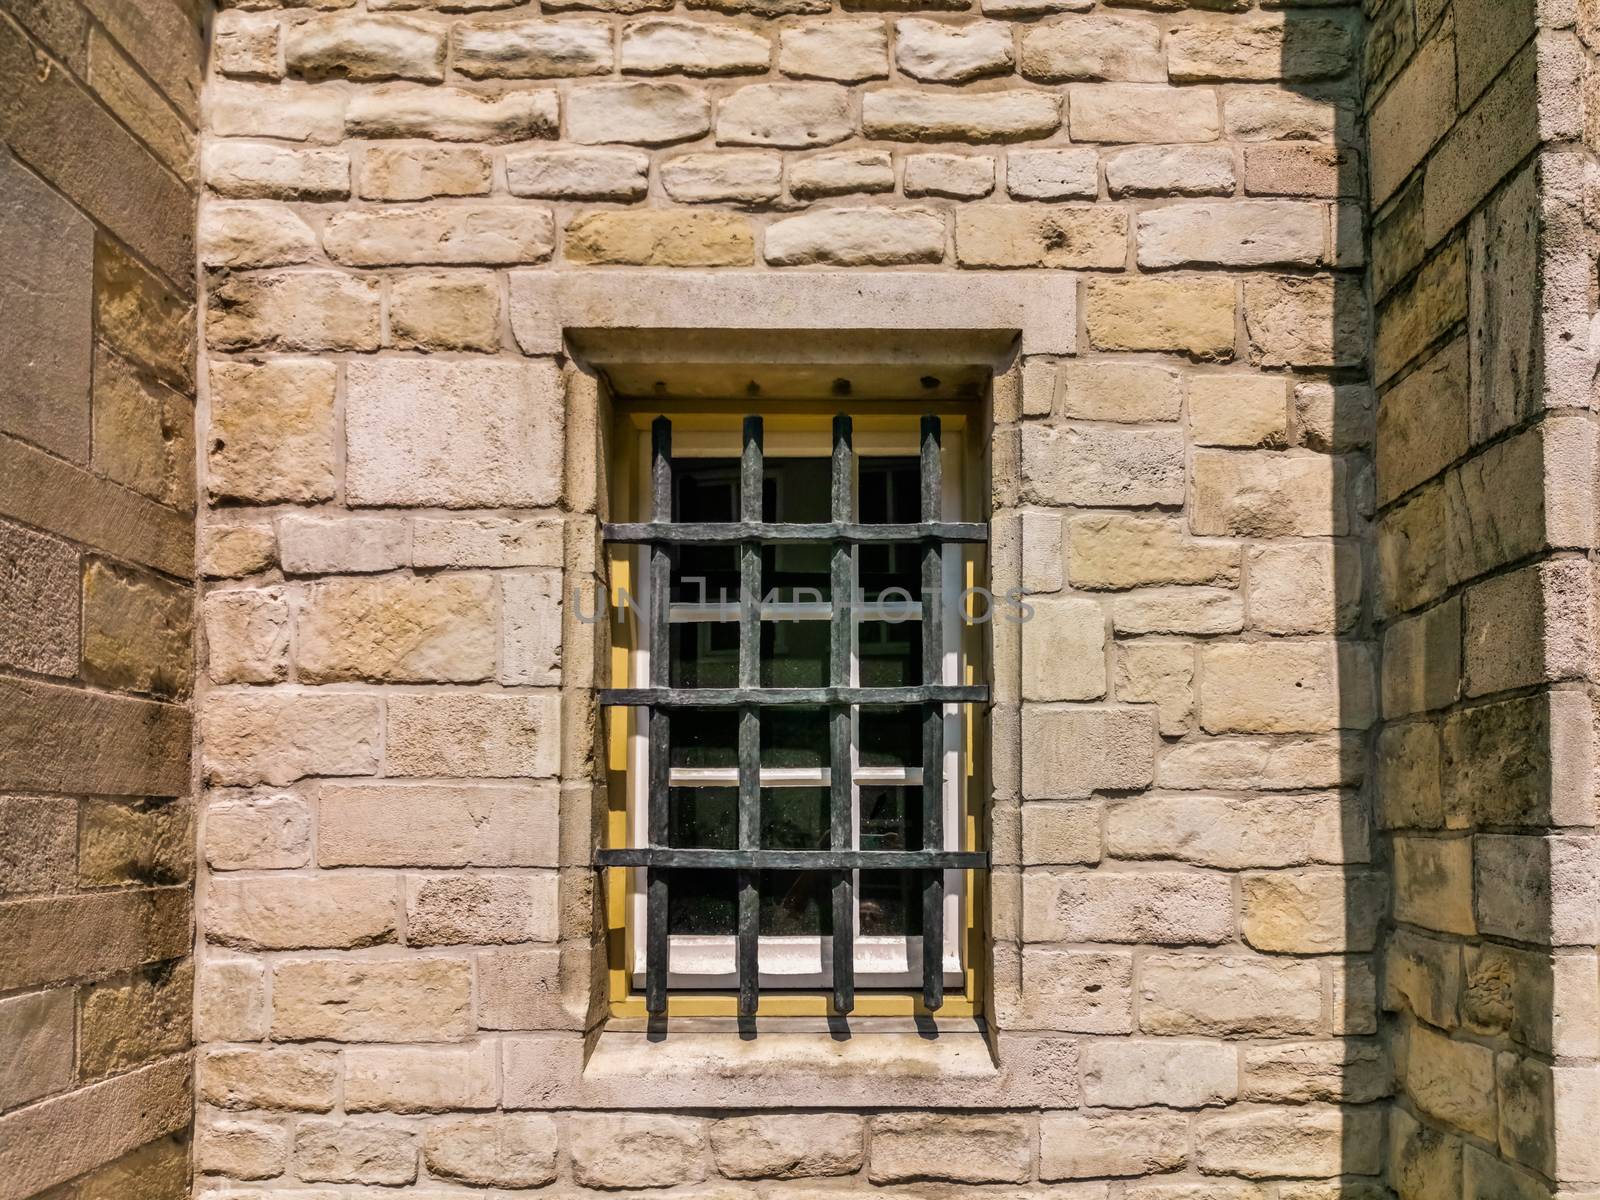 Vintage Wall with barred window, classical jail architecture, Prison background by charlottebleijenberg